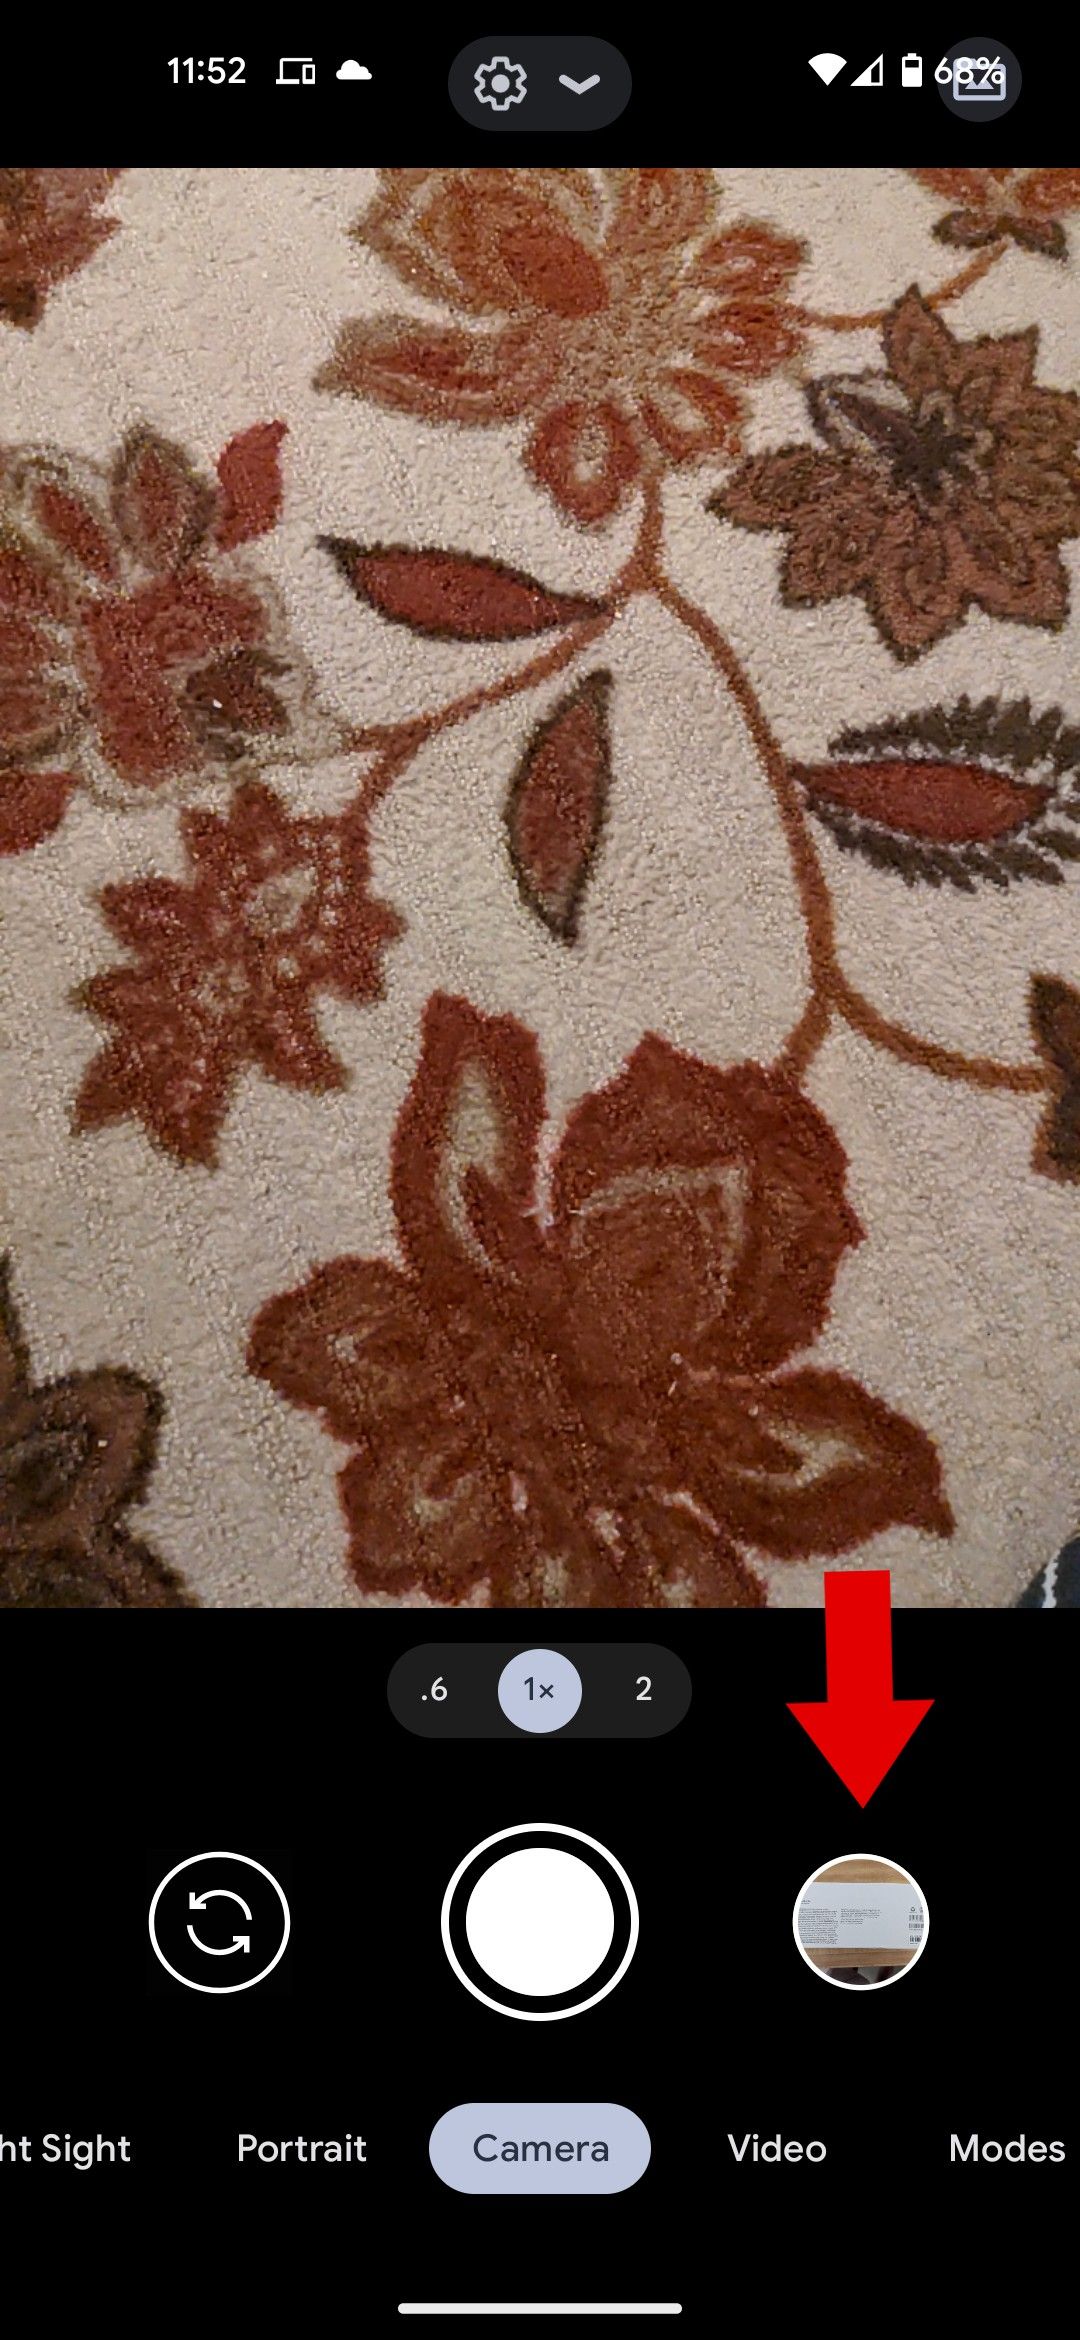 The Google camera app with a red arrow pointing to the photo library.